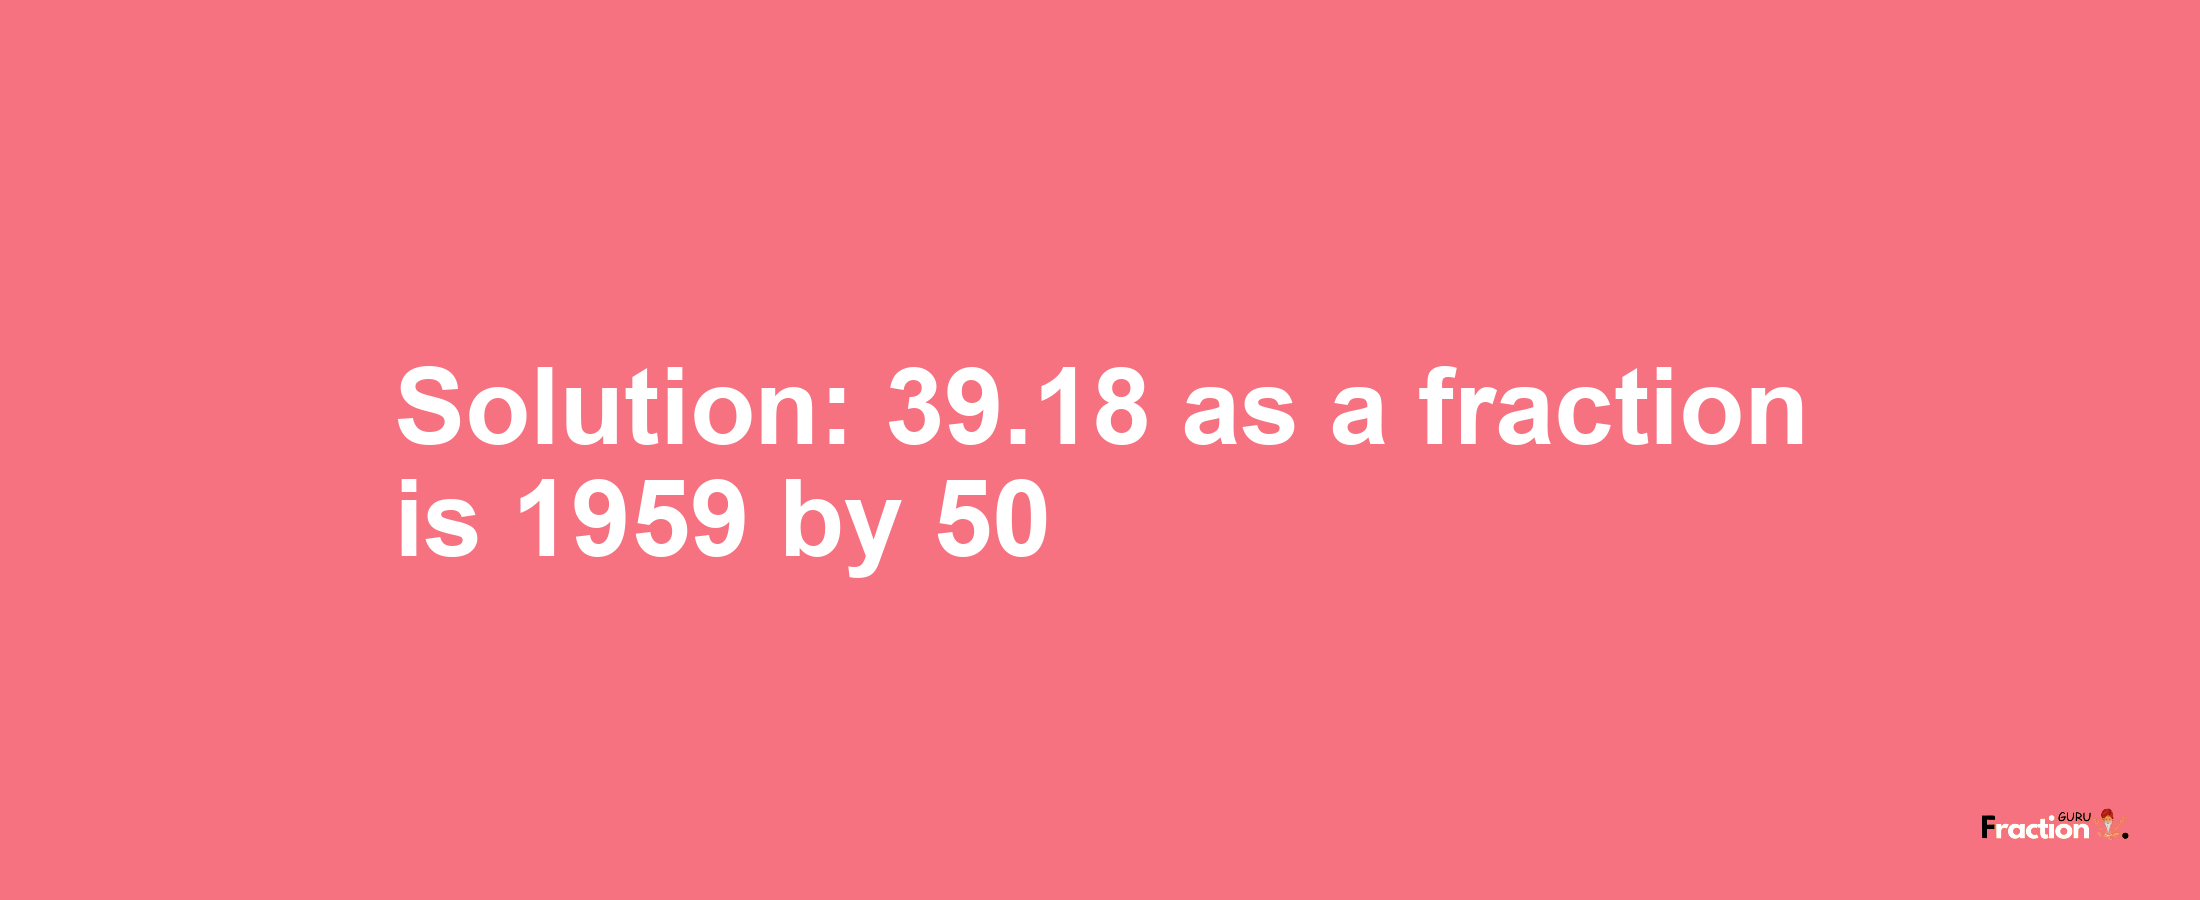 Solution:39.18 as a fraction is 1959/50